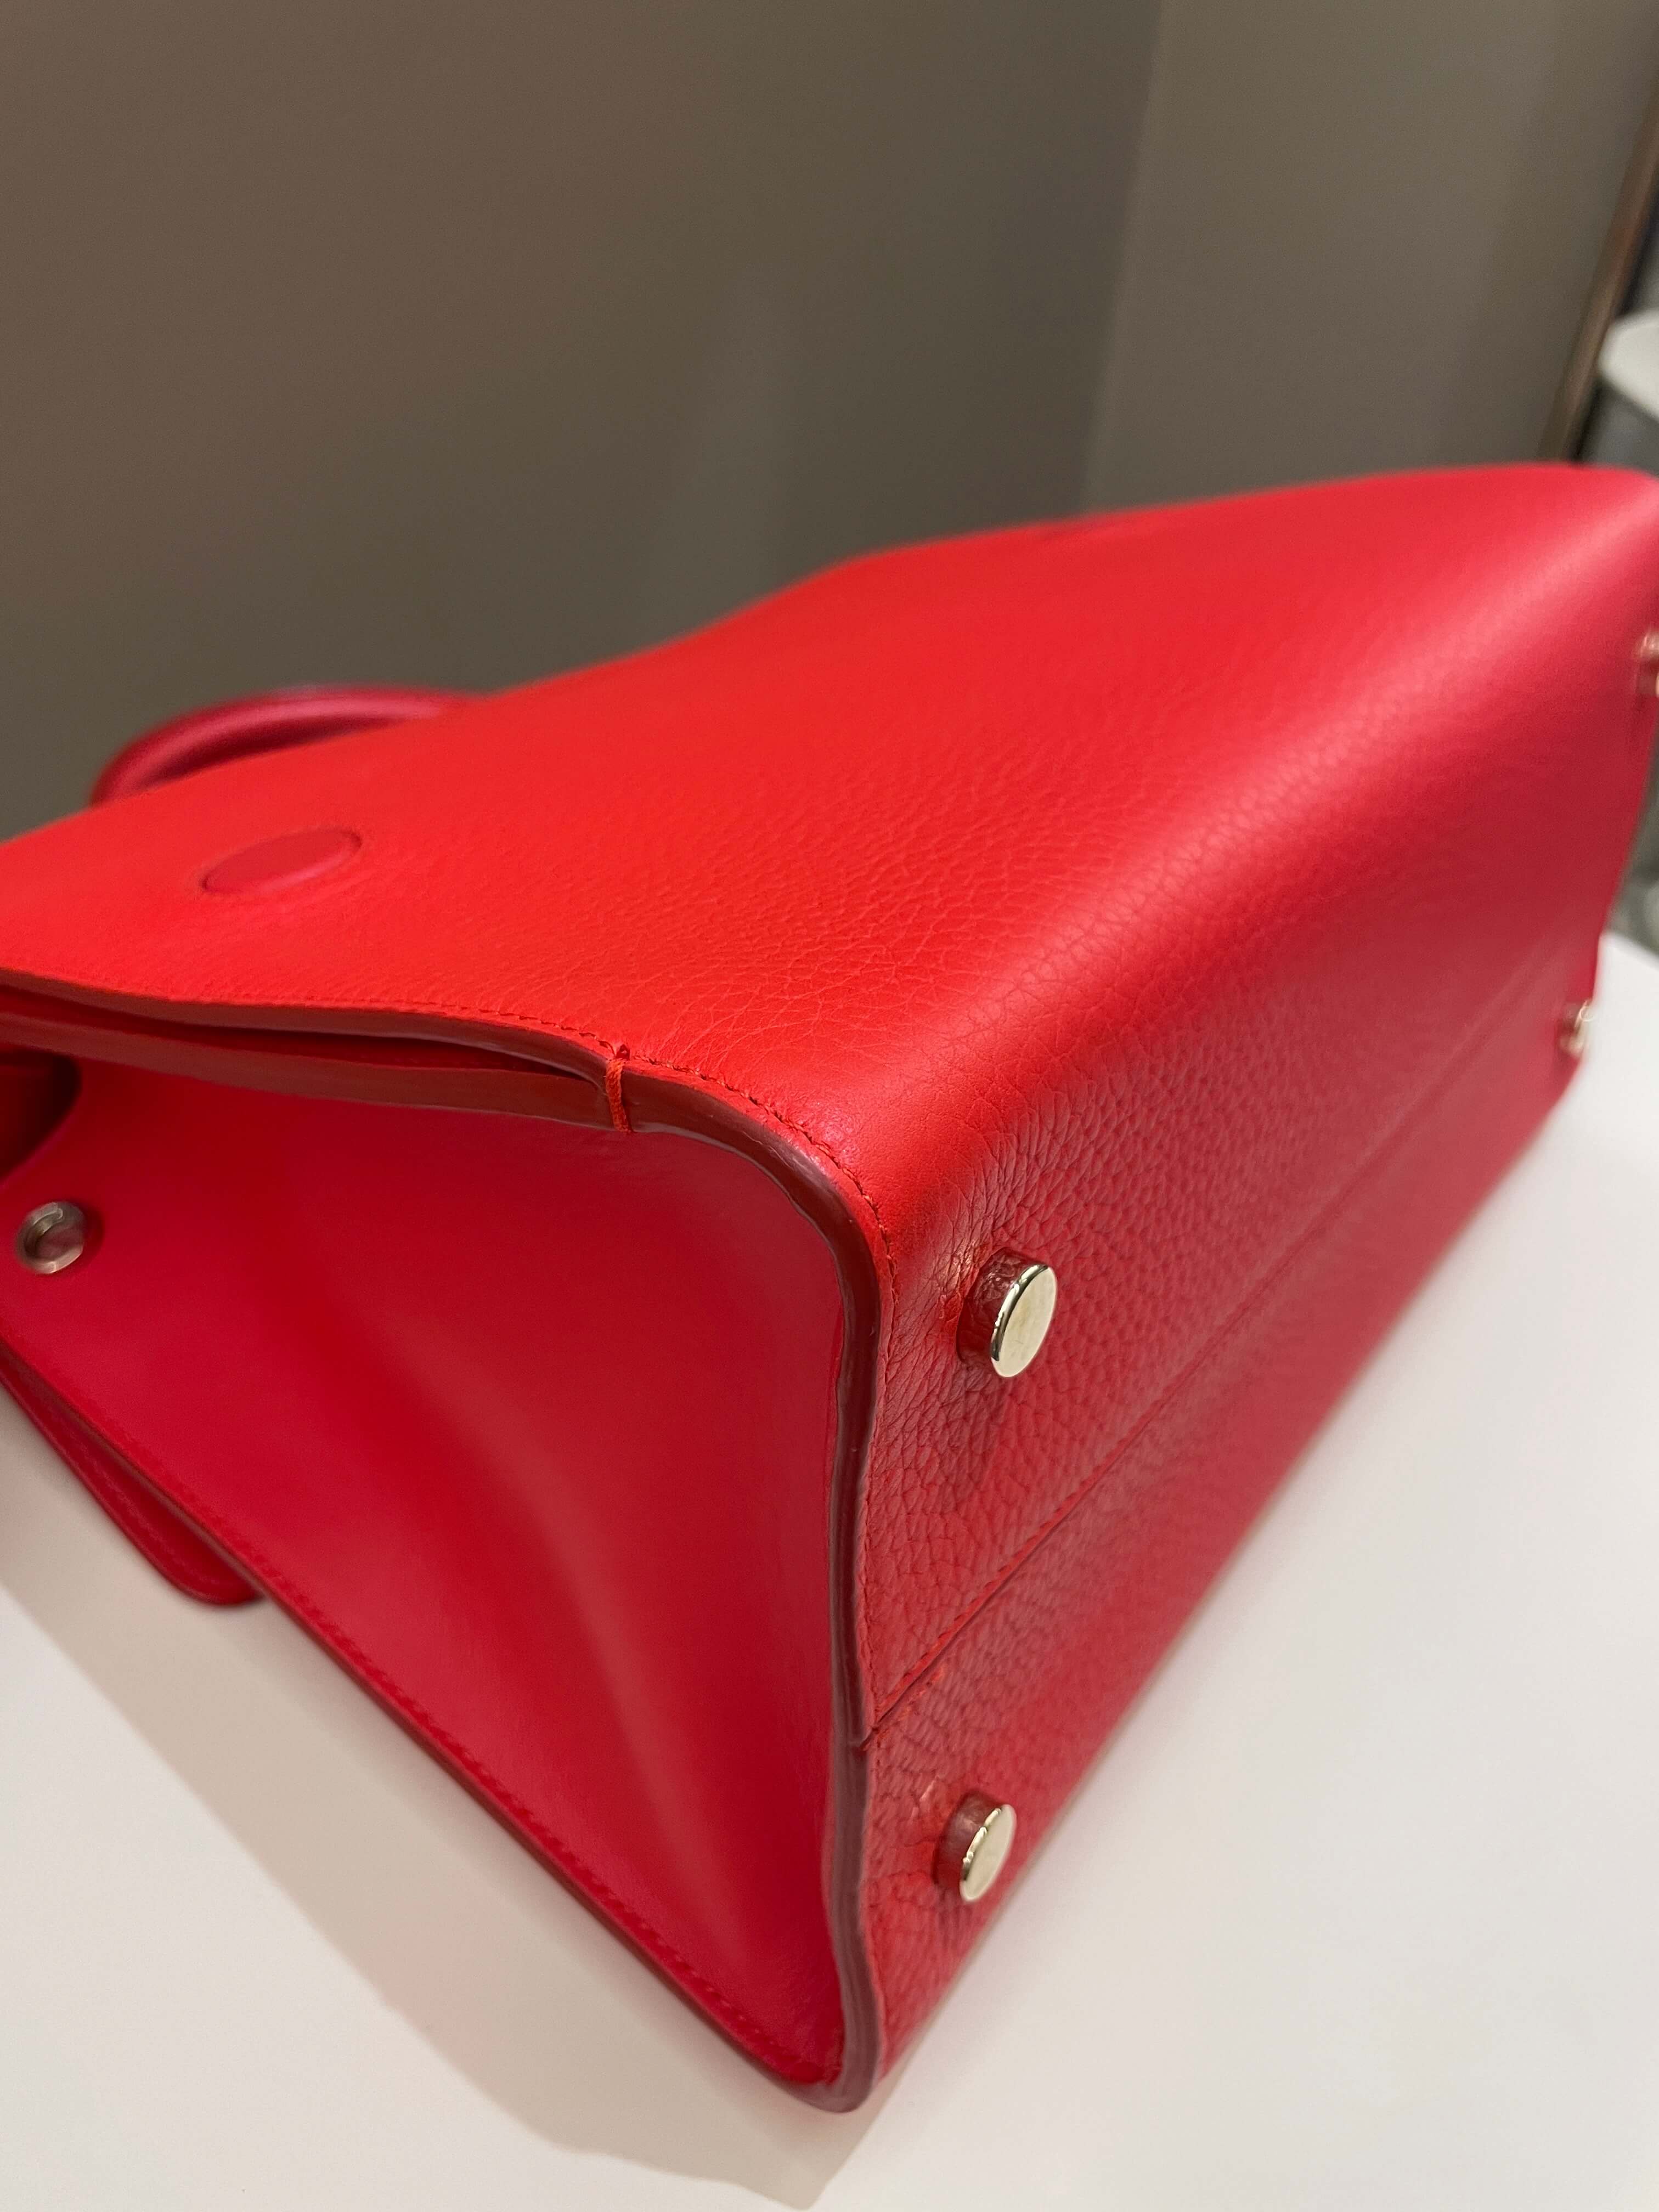 Dior Diorever Tote bag Red Grainy Leather